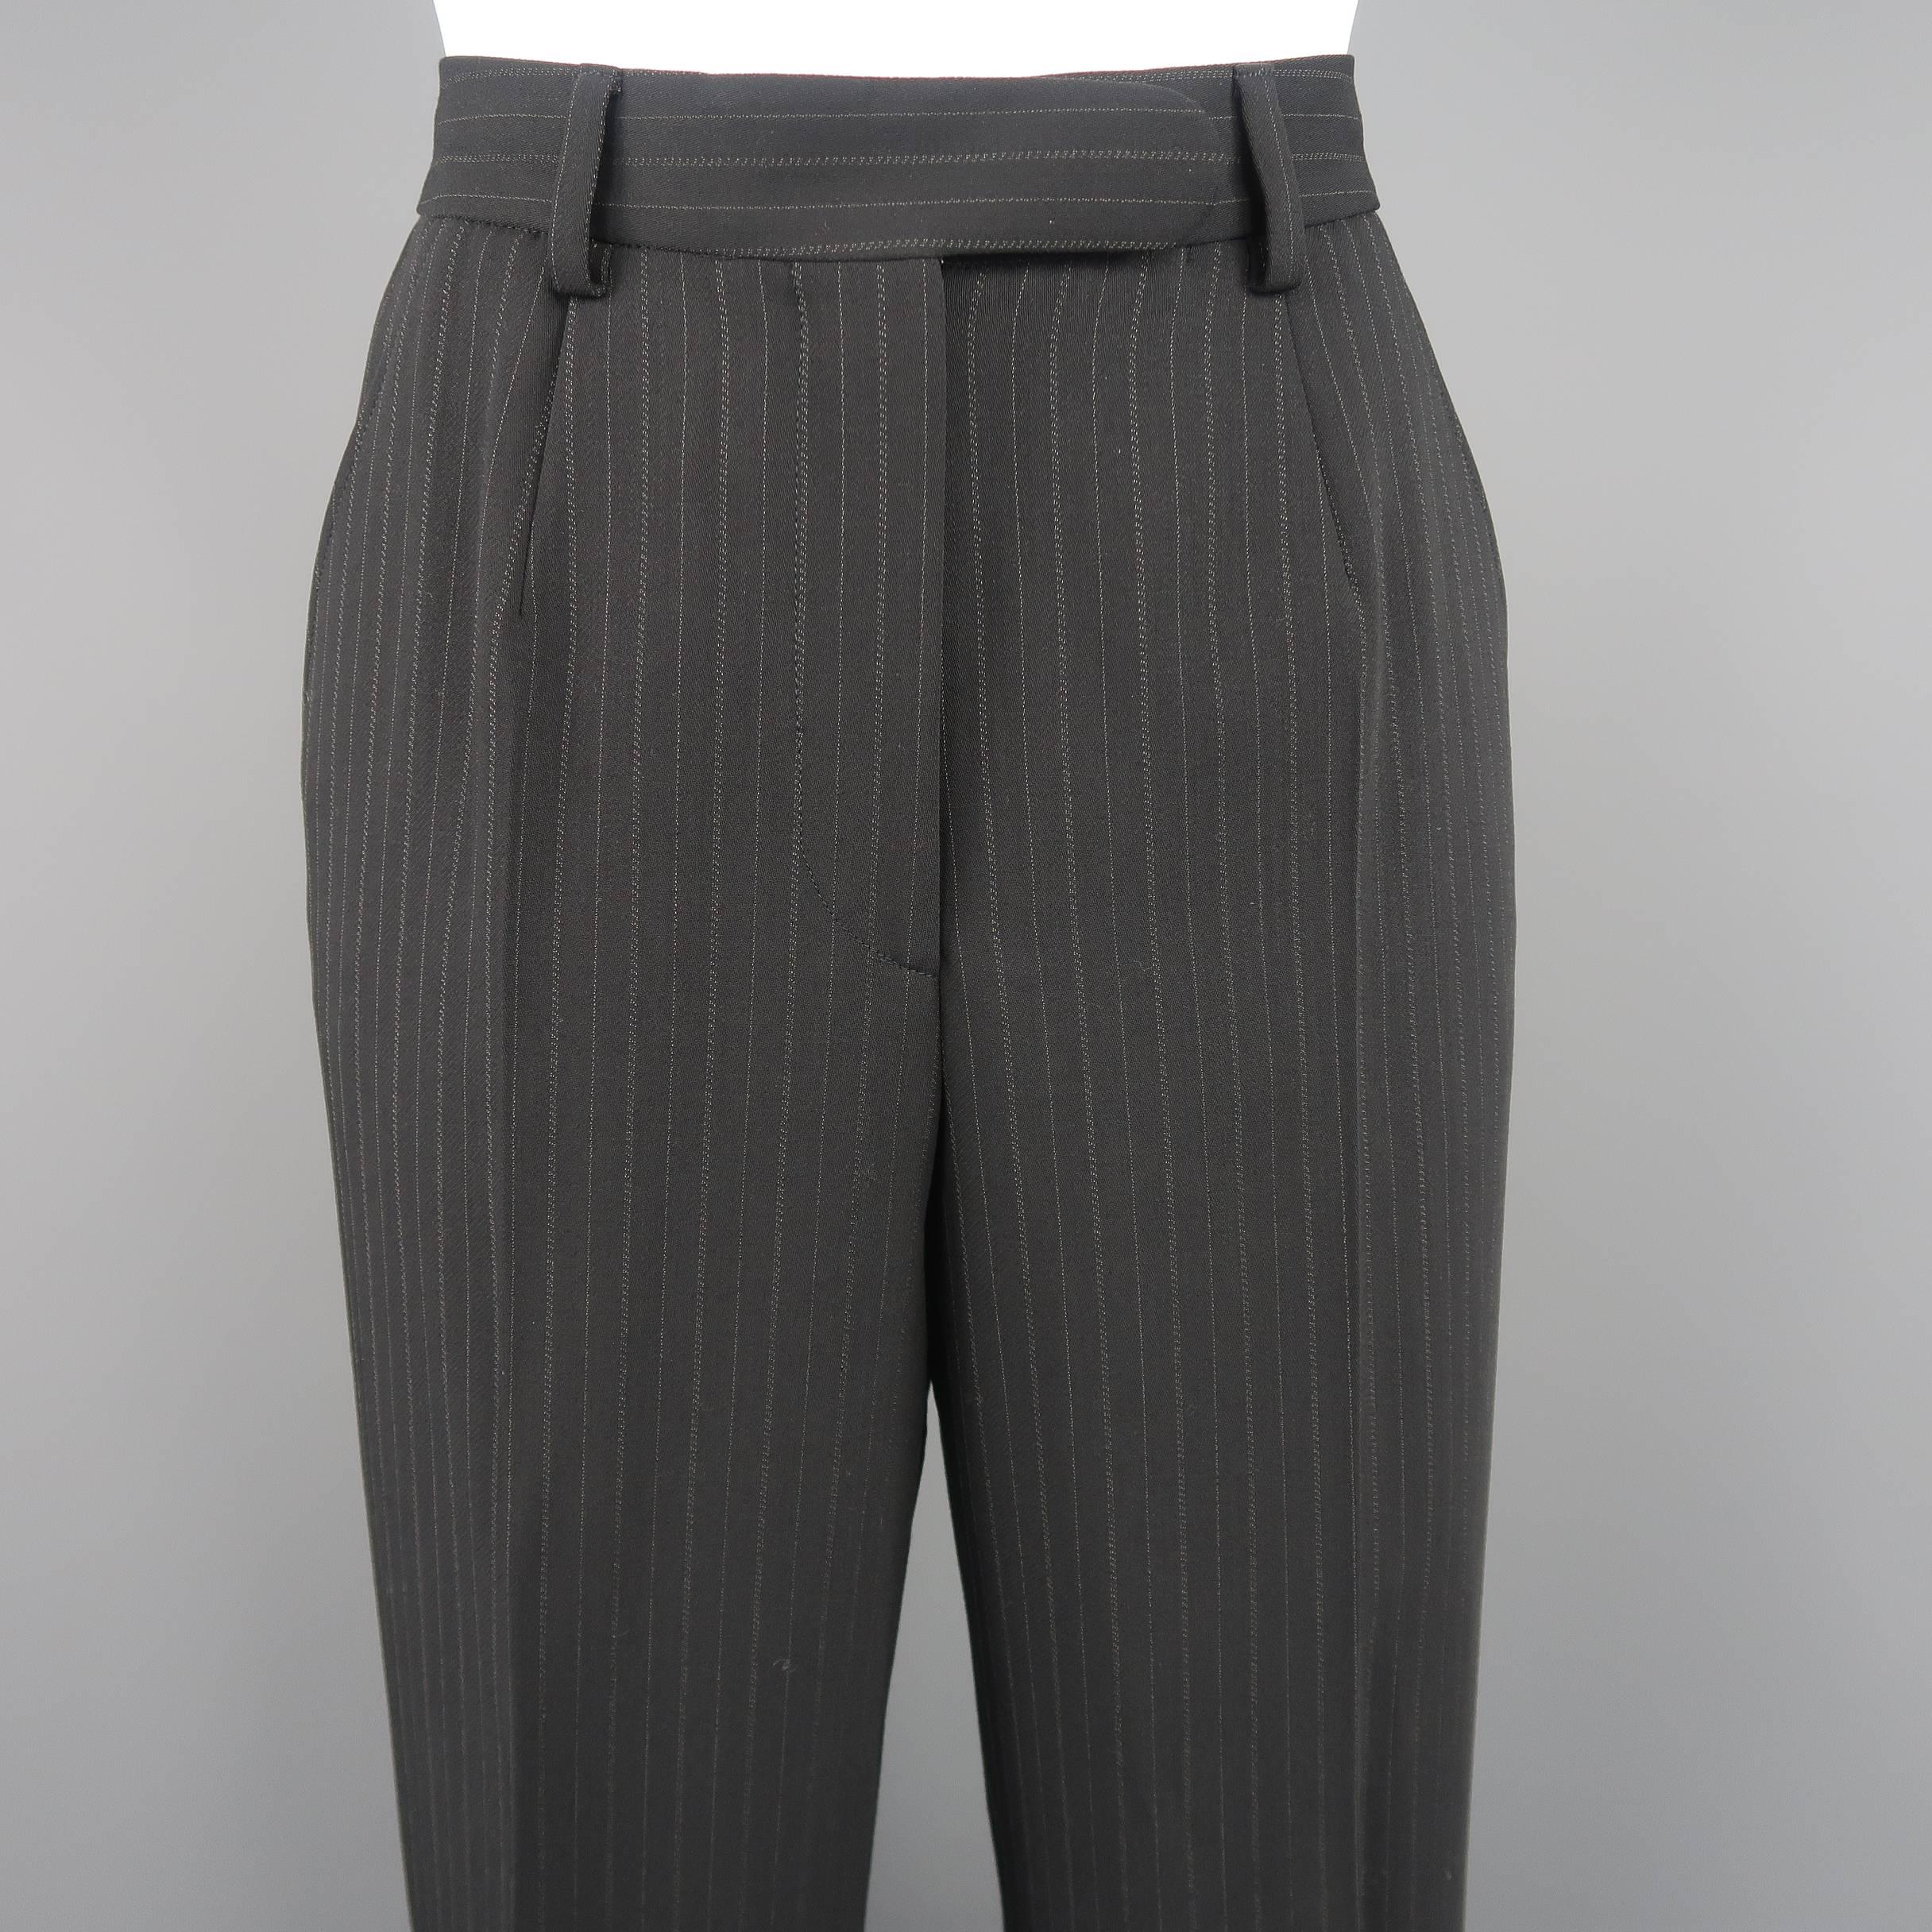 GIORGIO ARMANI Size 6 Black Pinstripe Wool Double Breasted Pants Suit 5